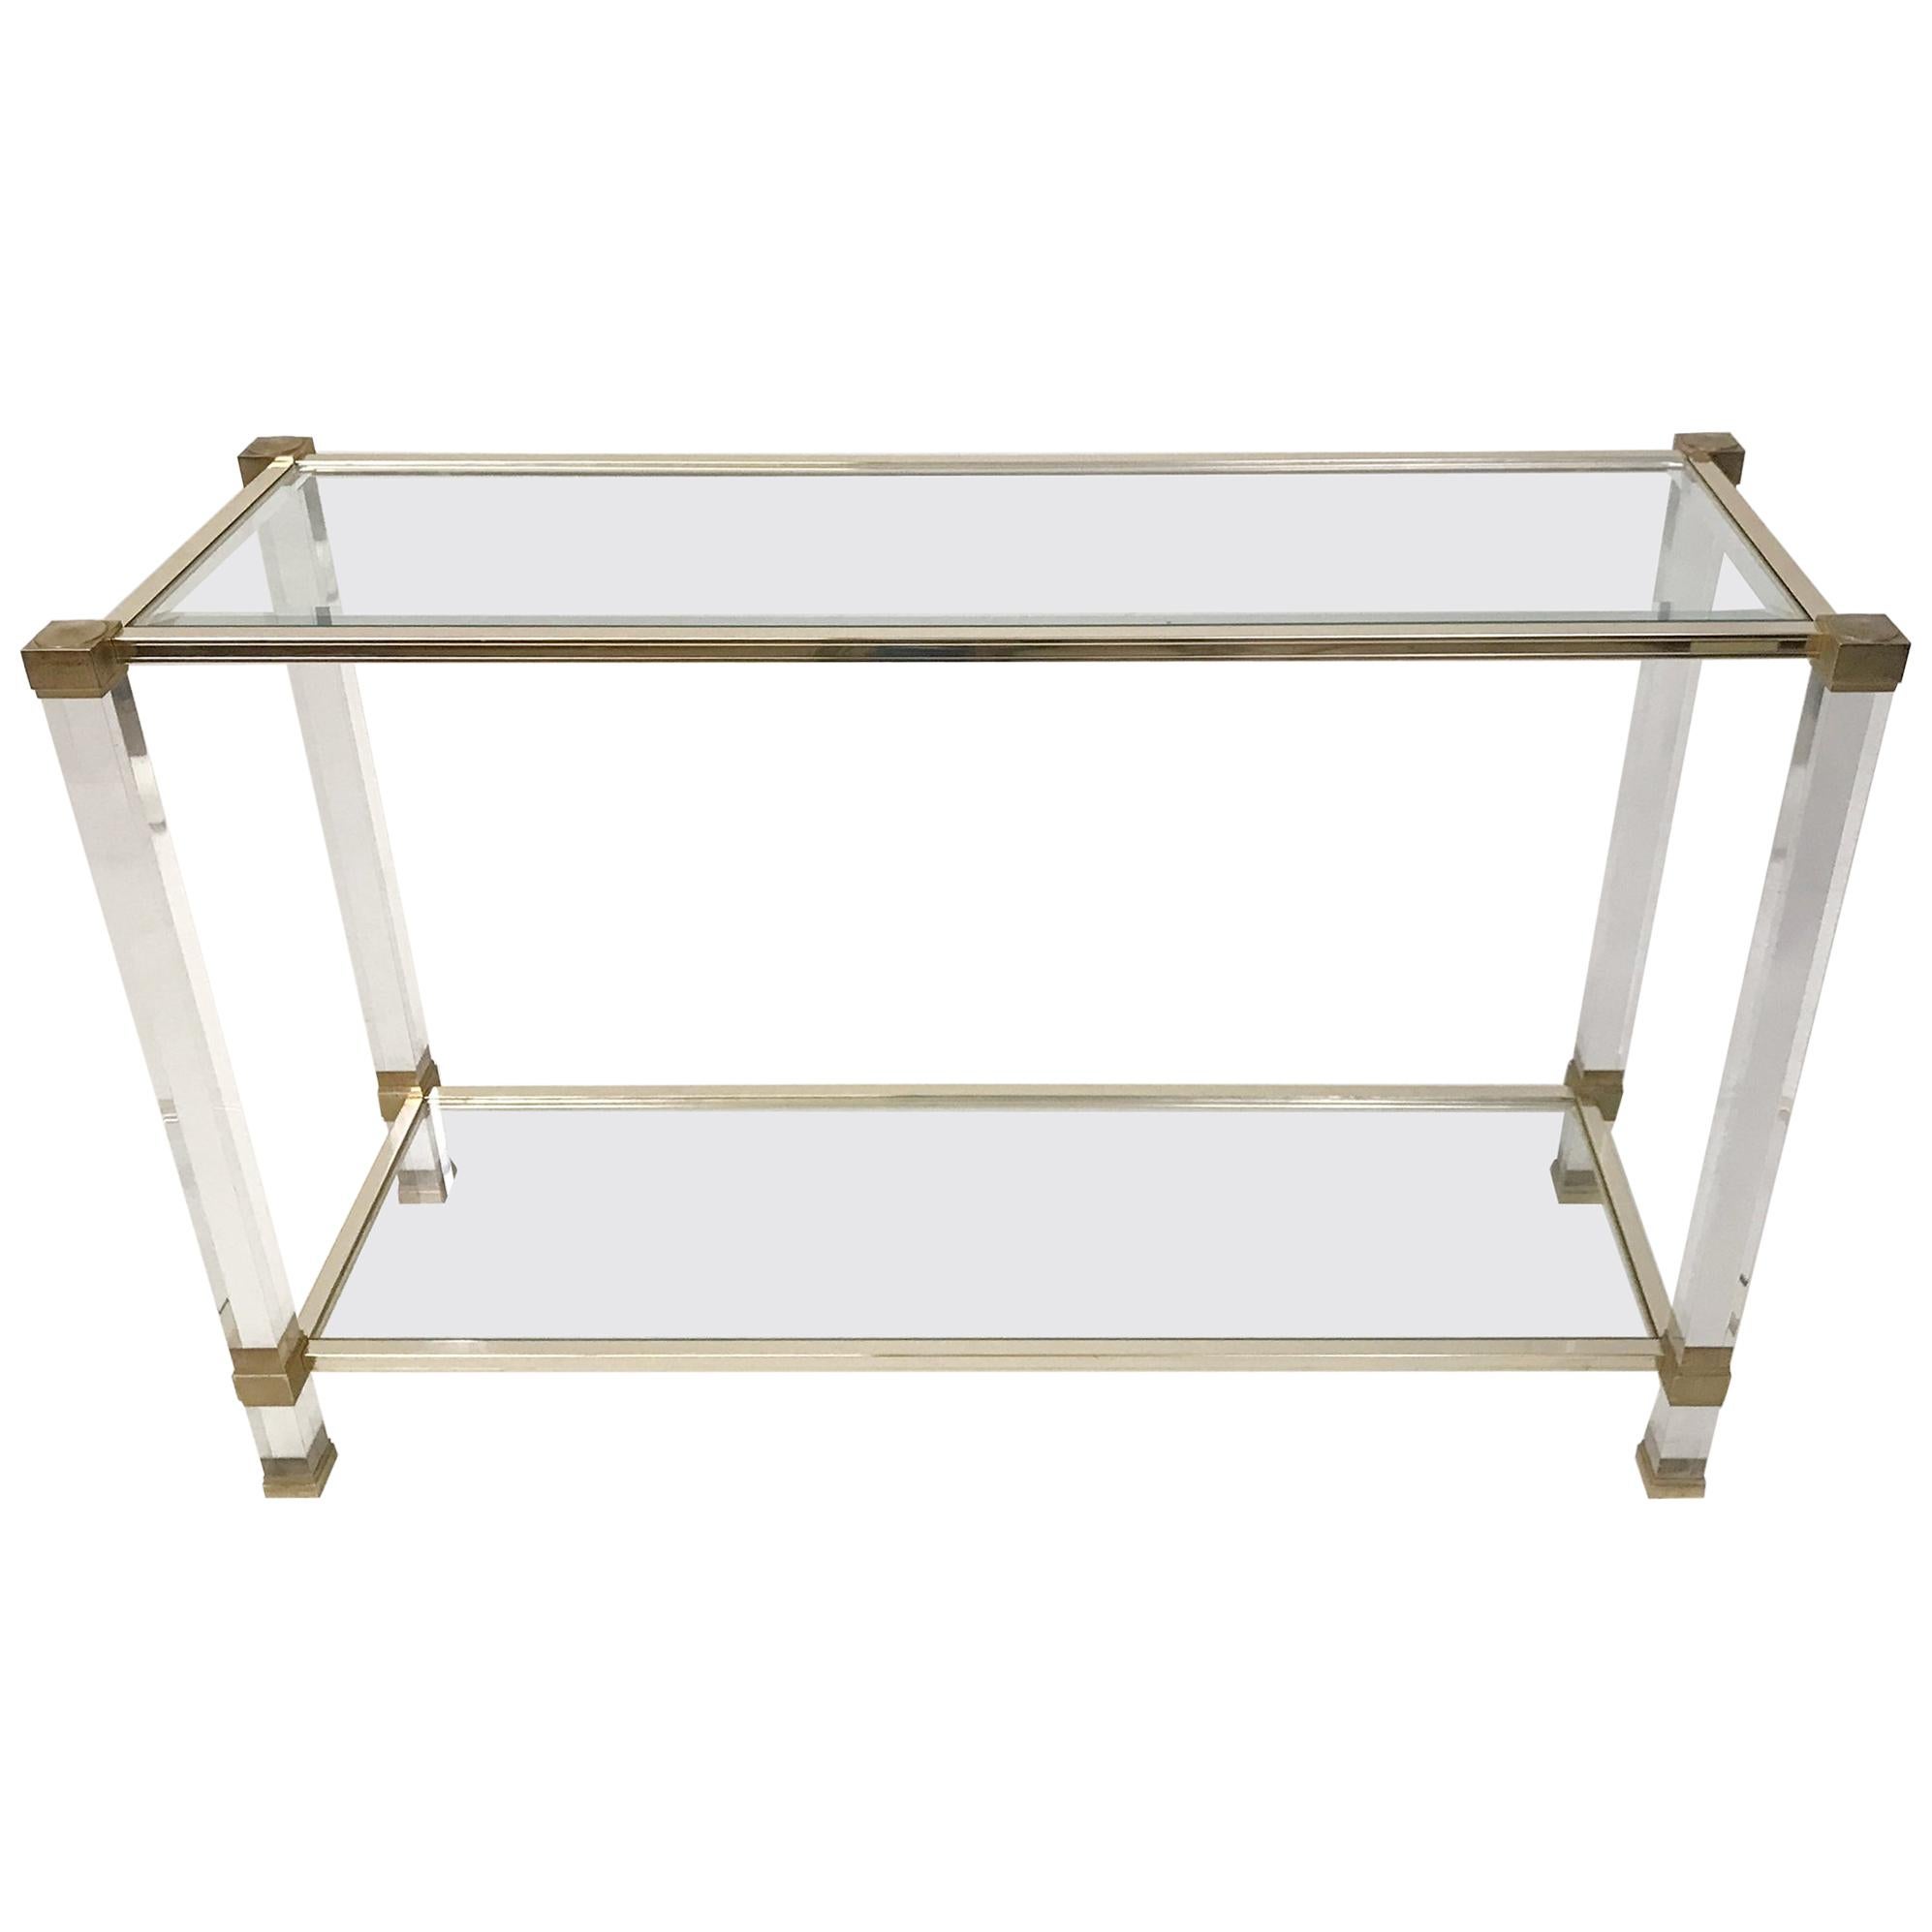 PIERRE VANDEL Lucite and Metal Console Table, France, 1970s